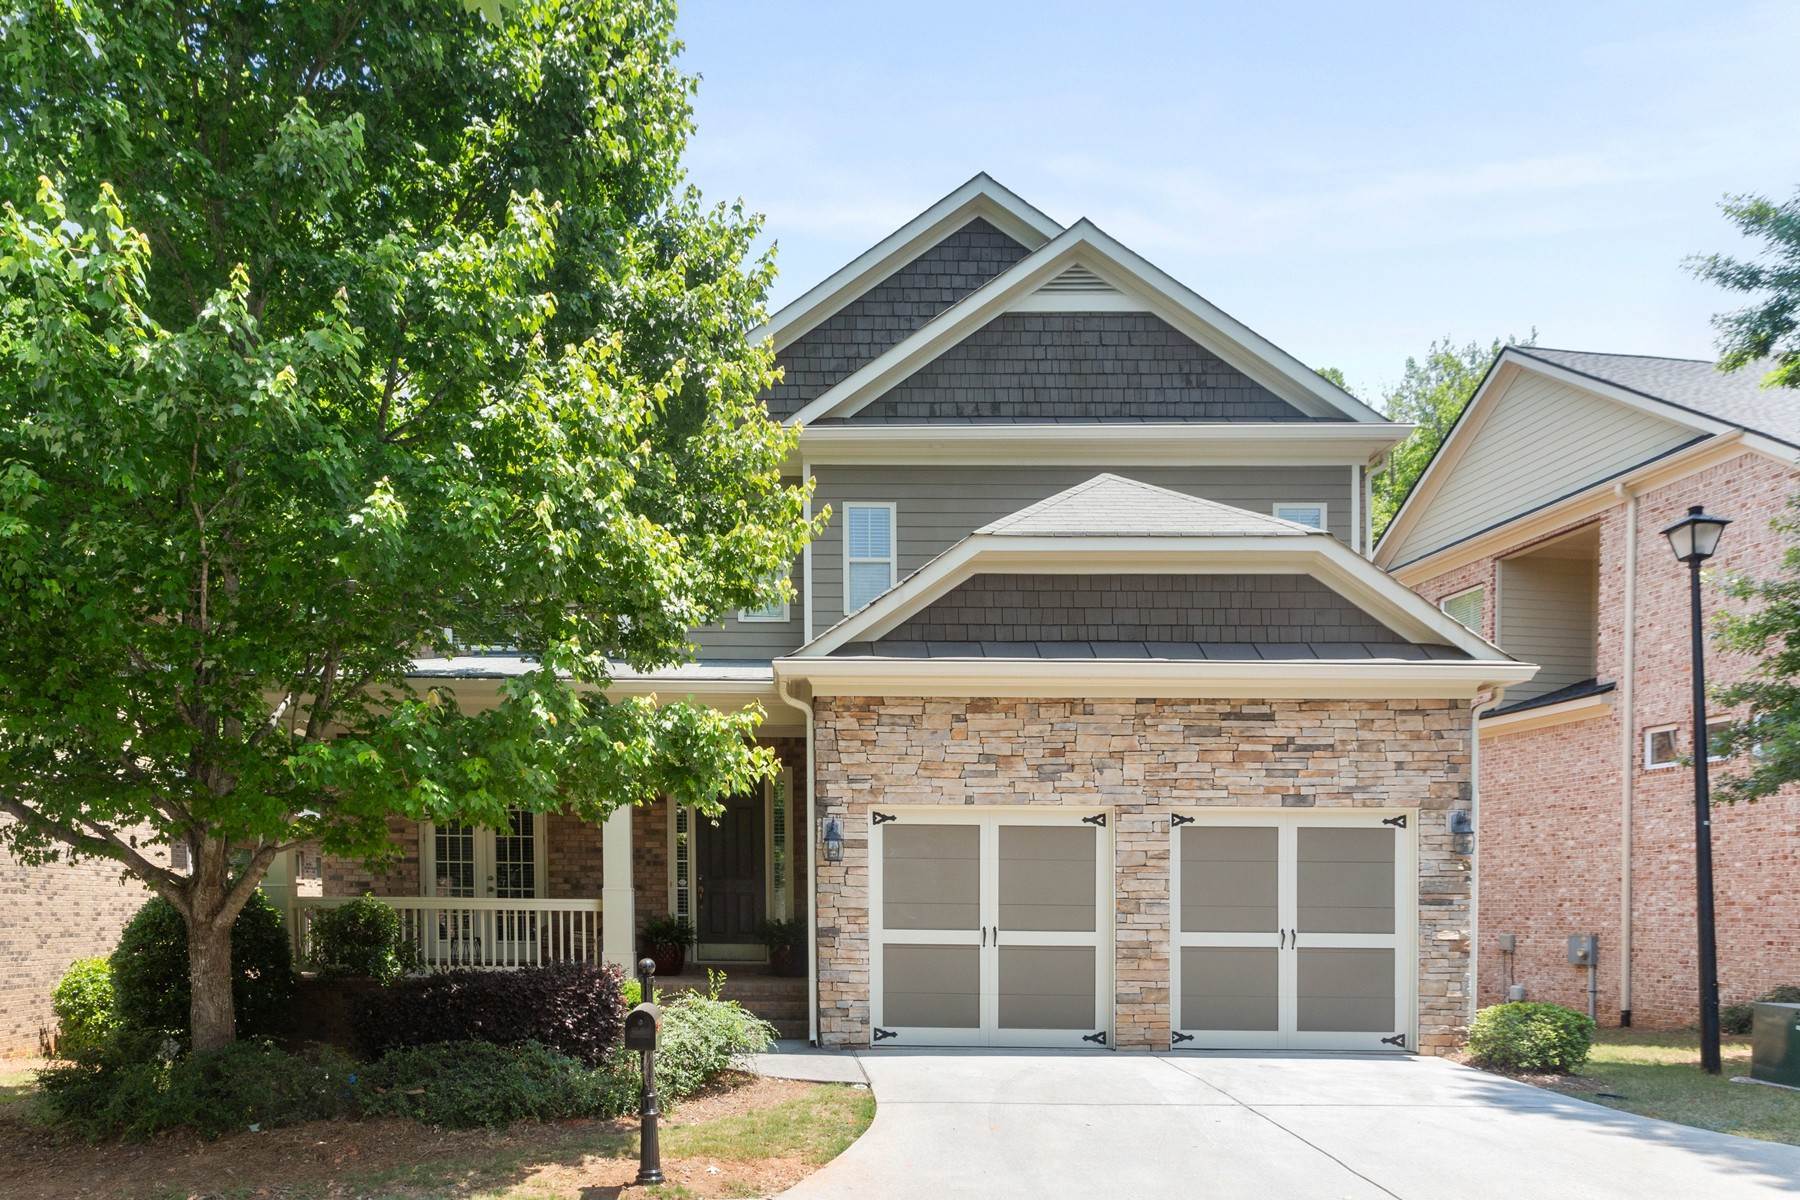 Single Family Homes for Sale at Move-in Ready and Lovingly Maintained Home in Desirable Crooked Creek in Milton 3268 Kentworth Lane Milton, Georgia 30004 United States